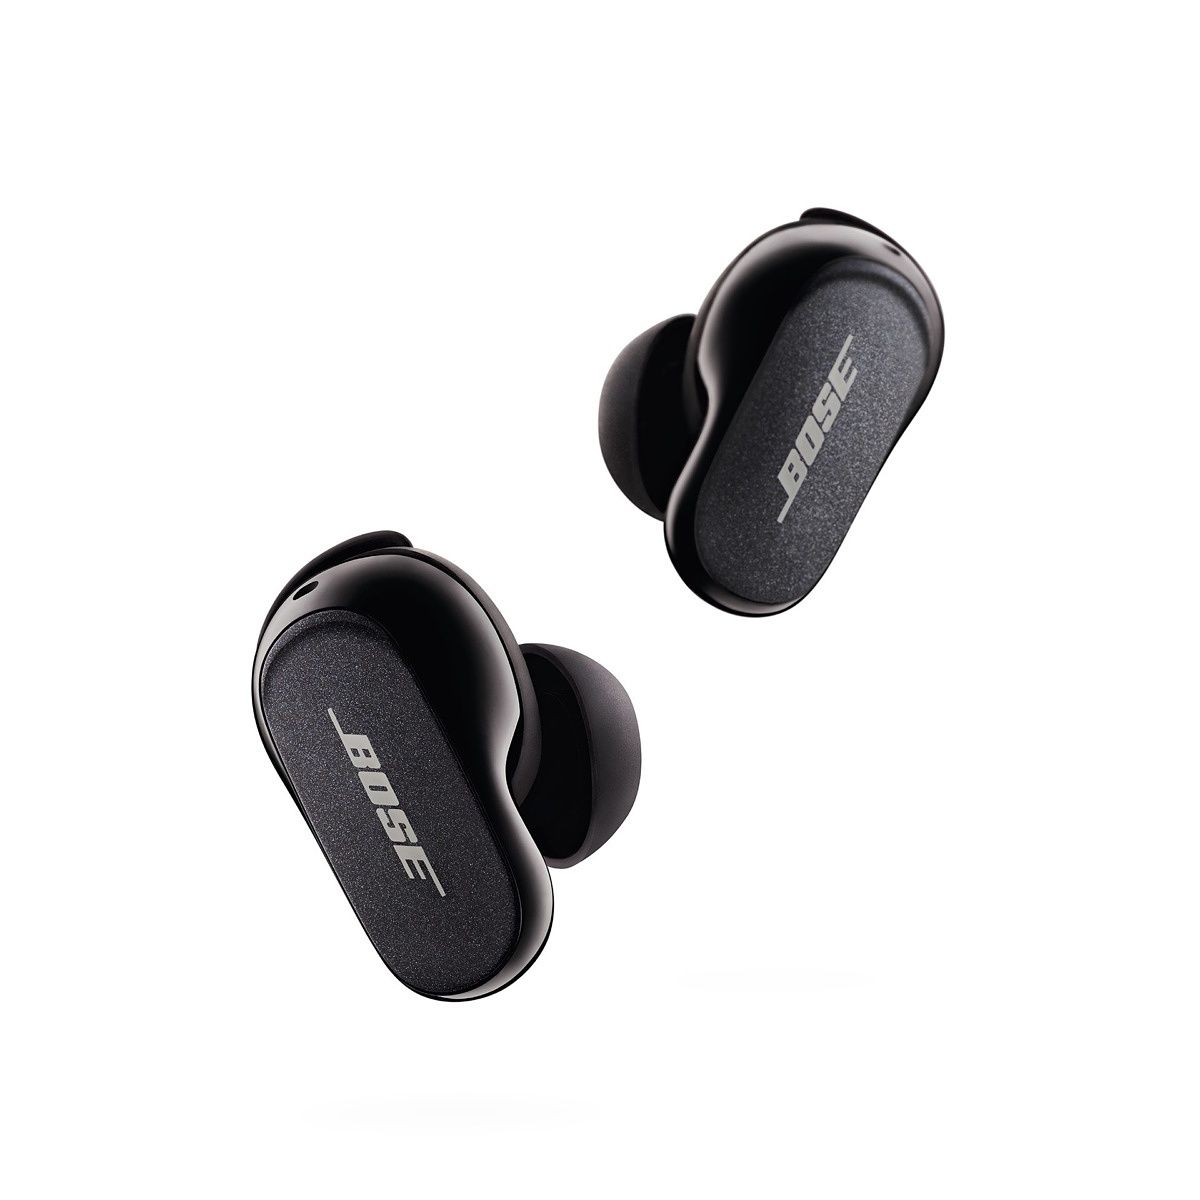 The Bose QuietComfort Earbuds II will be available on September 15 